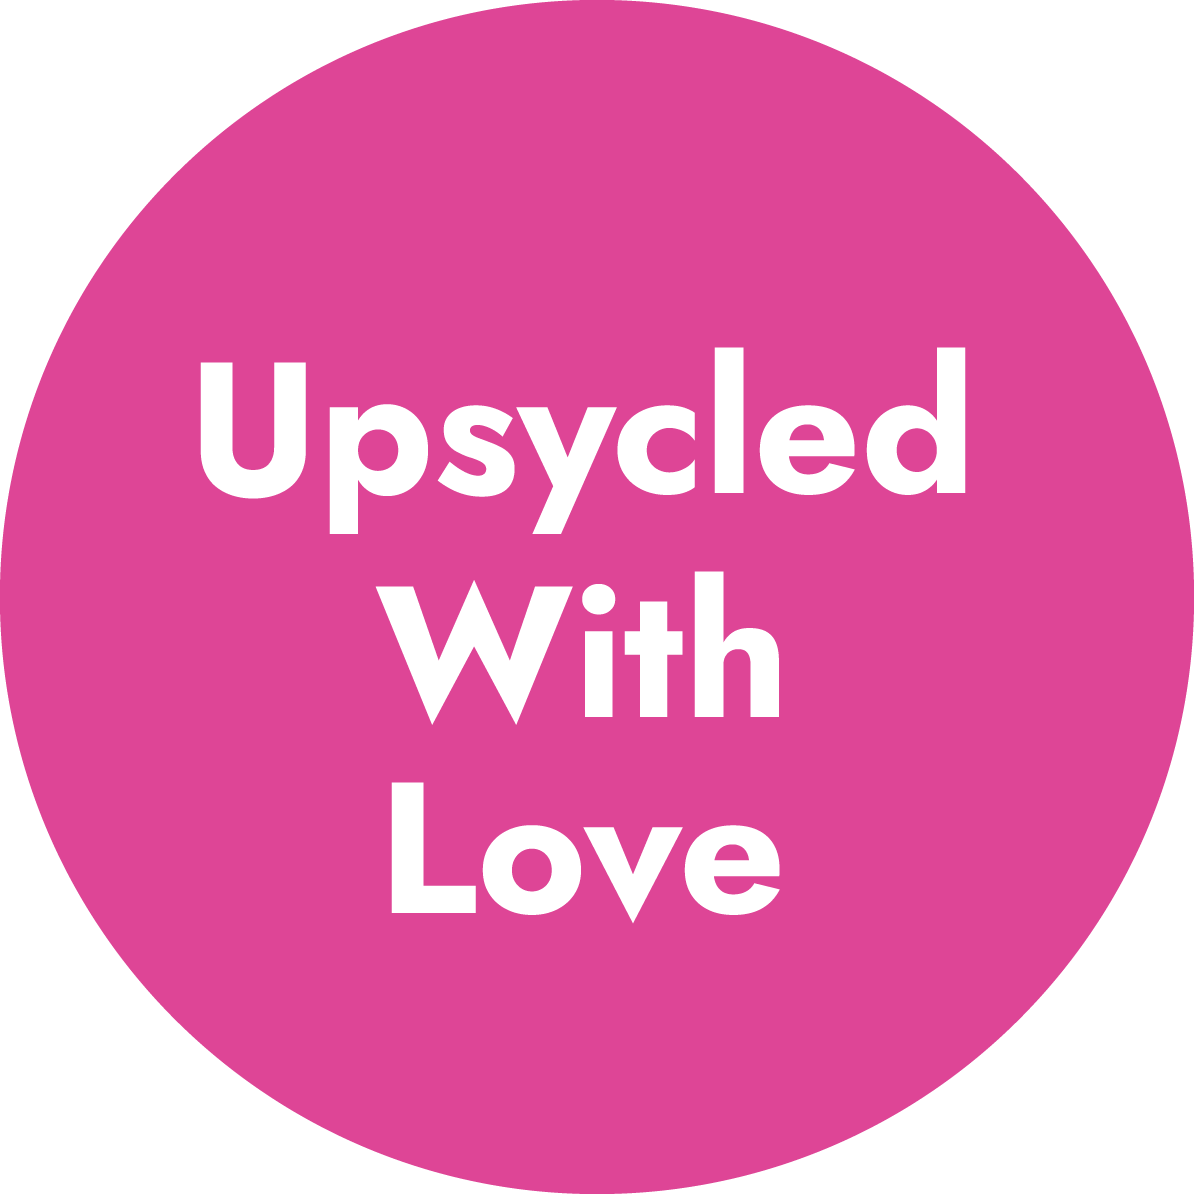 Upsycled With Love